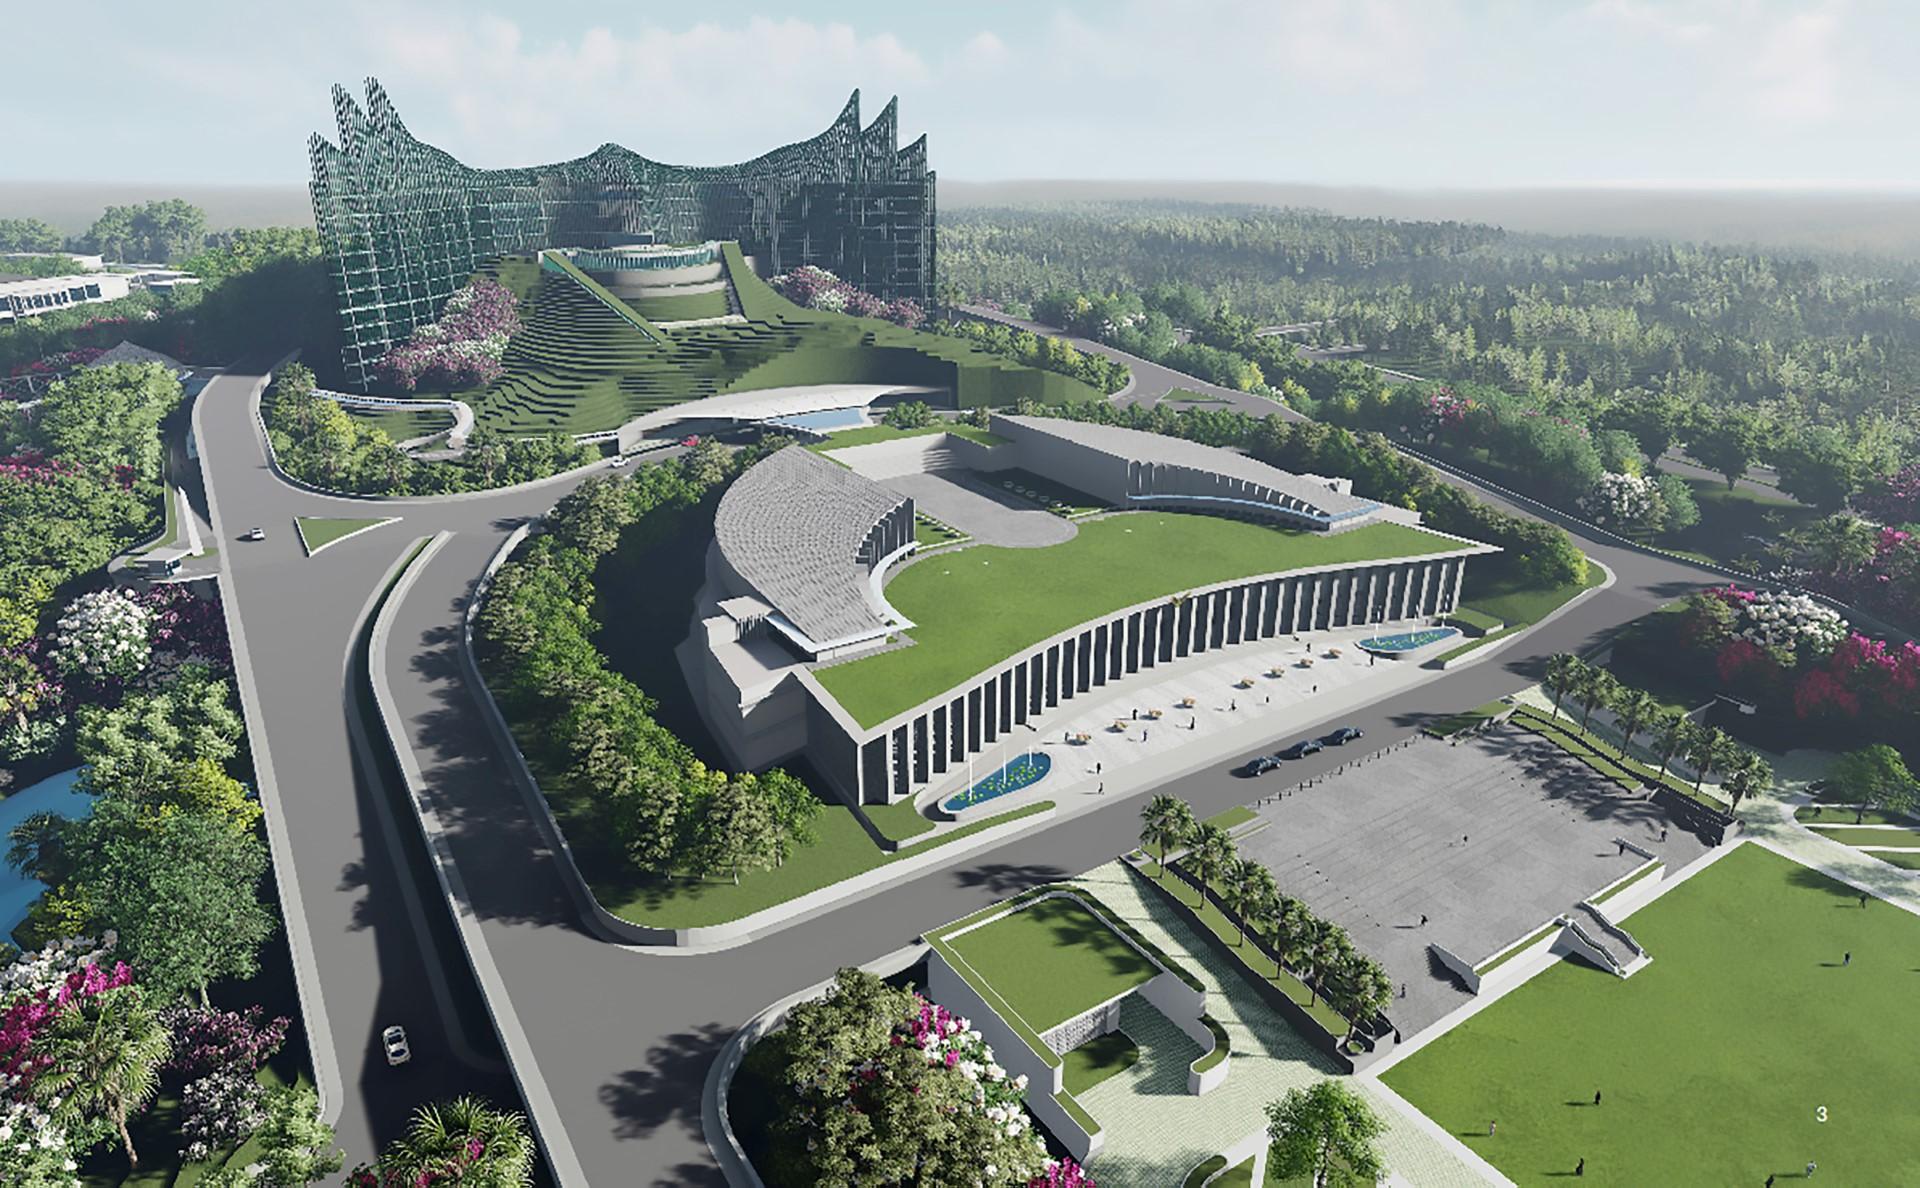 This undated handout showing computer-generated imagery released by Nyoman Nuarta on Jan 18 shows a design illustration of Indonesia's future presidential palace in East Kalimantan, as part of the country's relocation of its capital from Jakarta to Nusantara, a site 2,000km away. Photo: AFP